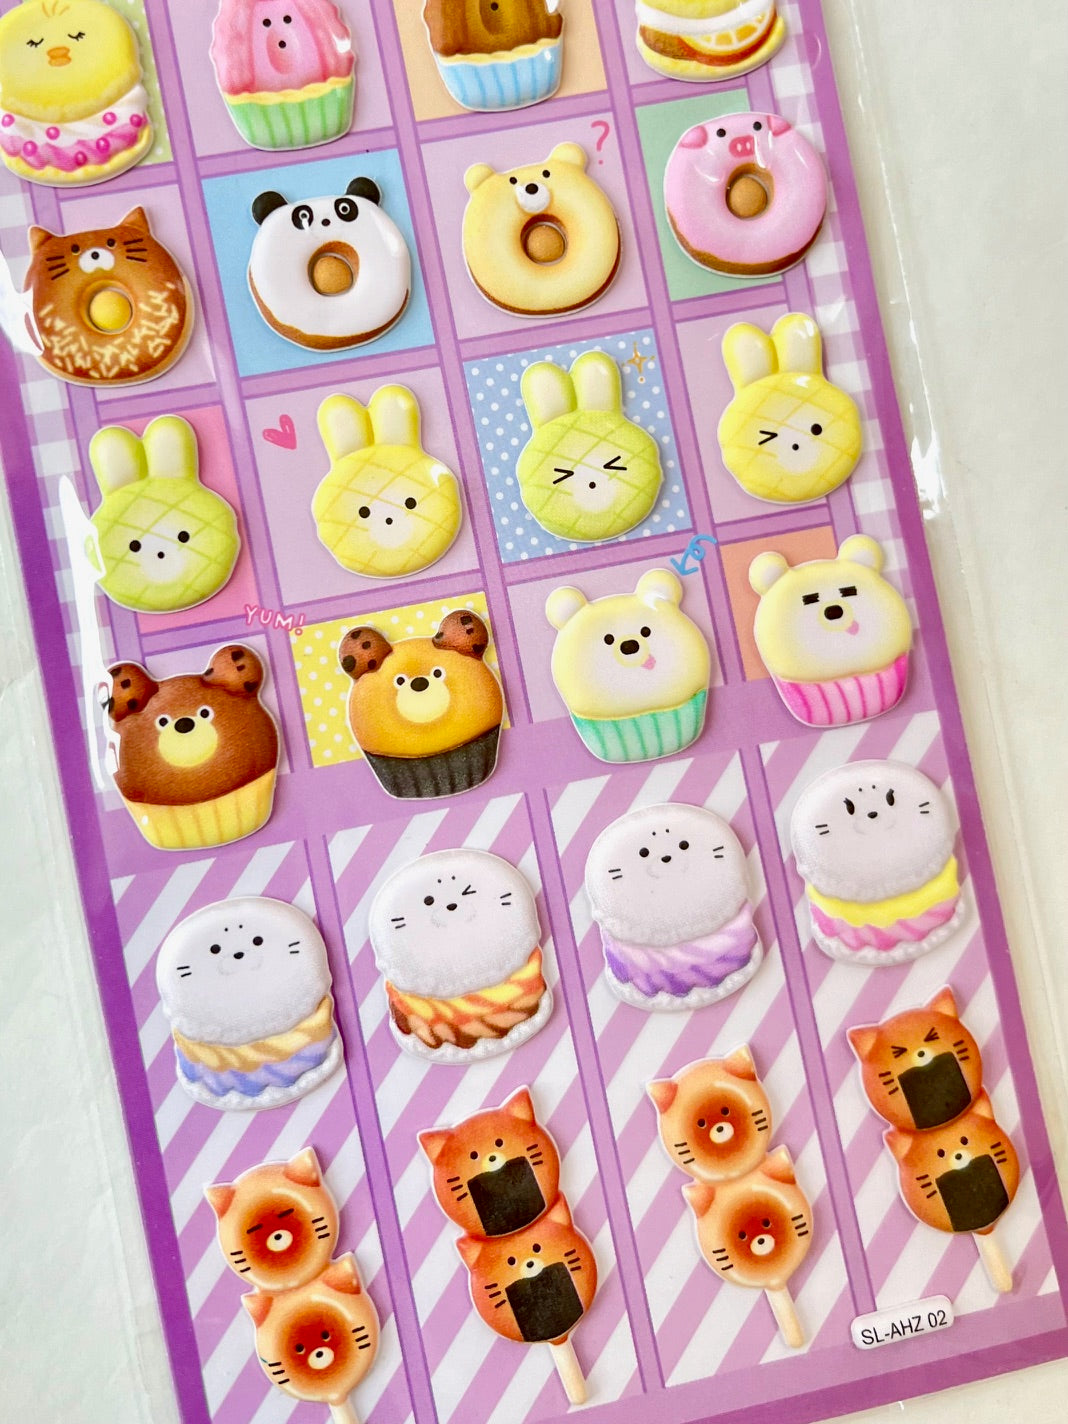 11001 Sweets Puffy Assorted Stickers-12